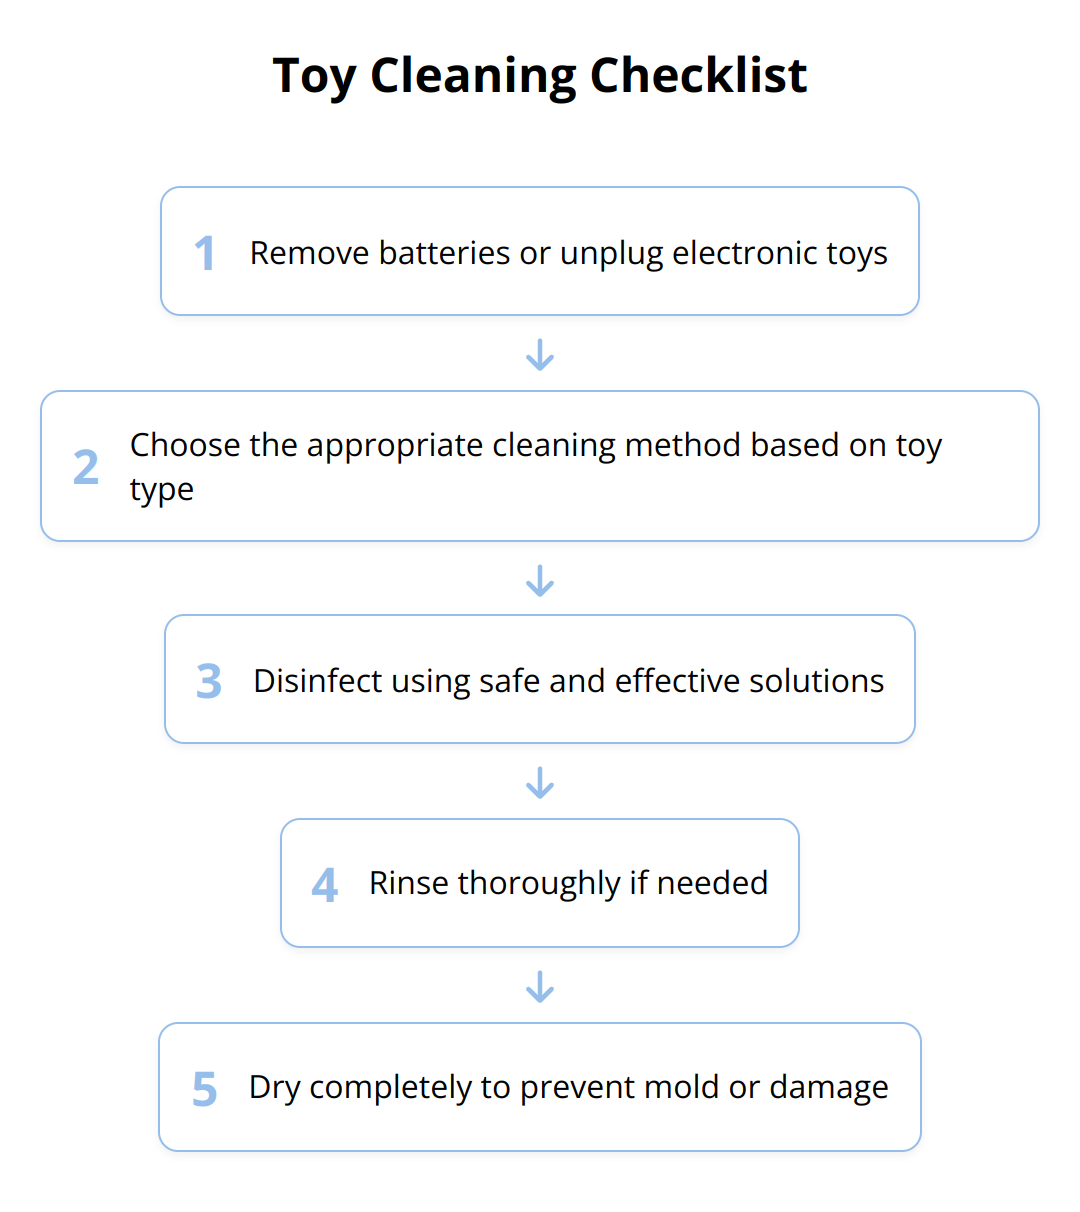 Flow Chart - Toy Cleaning Checklist